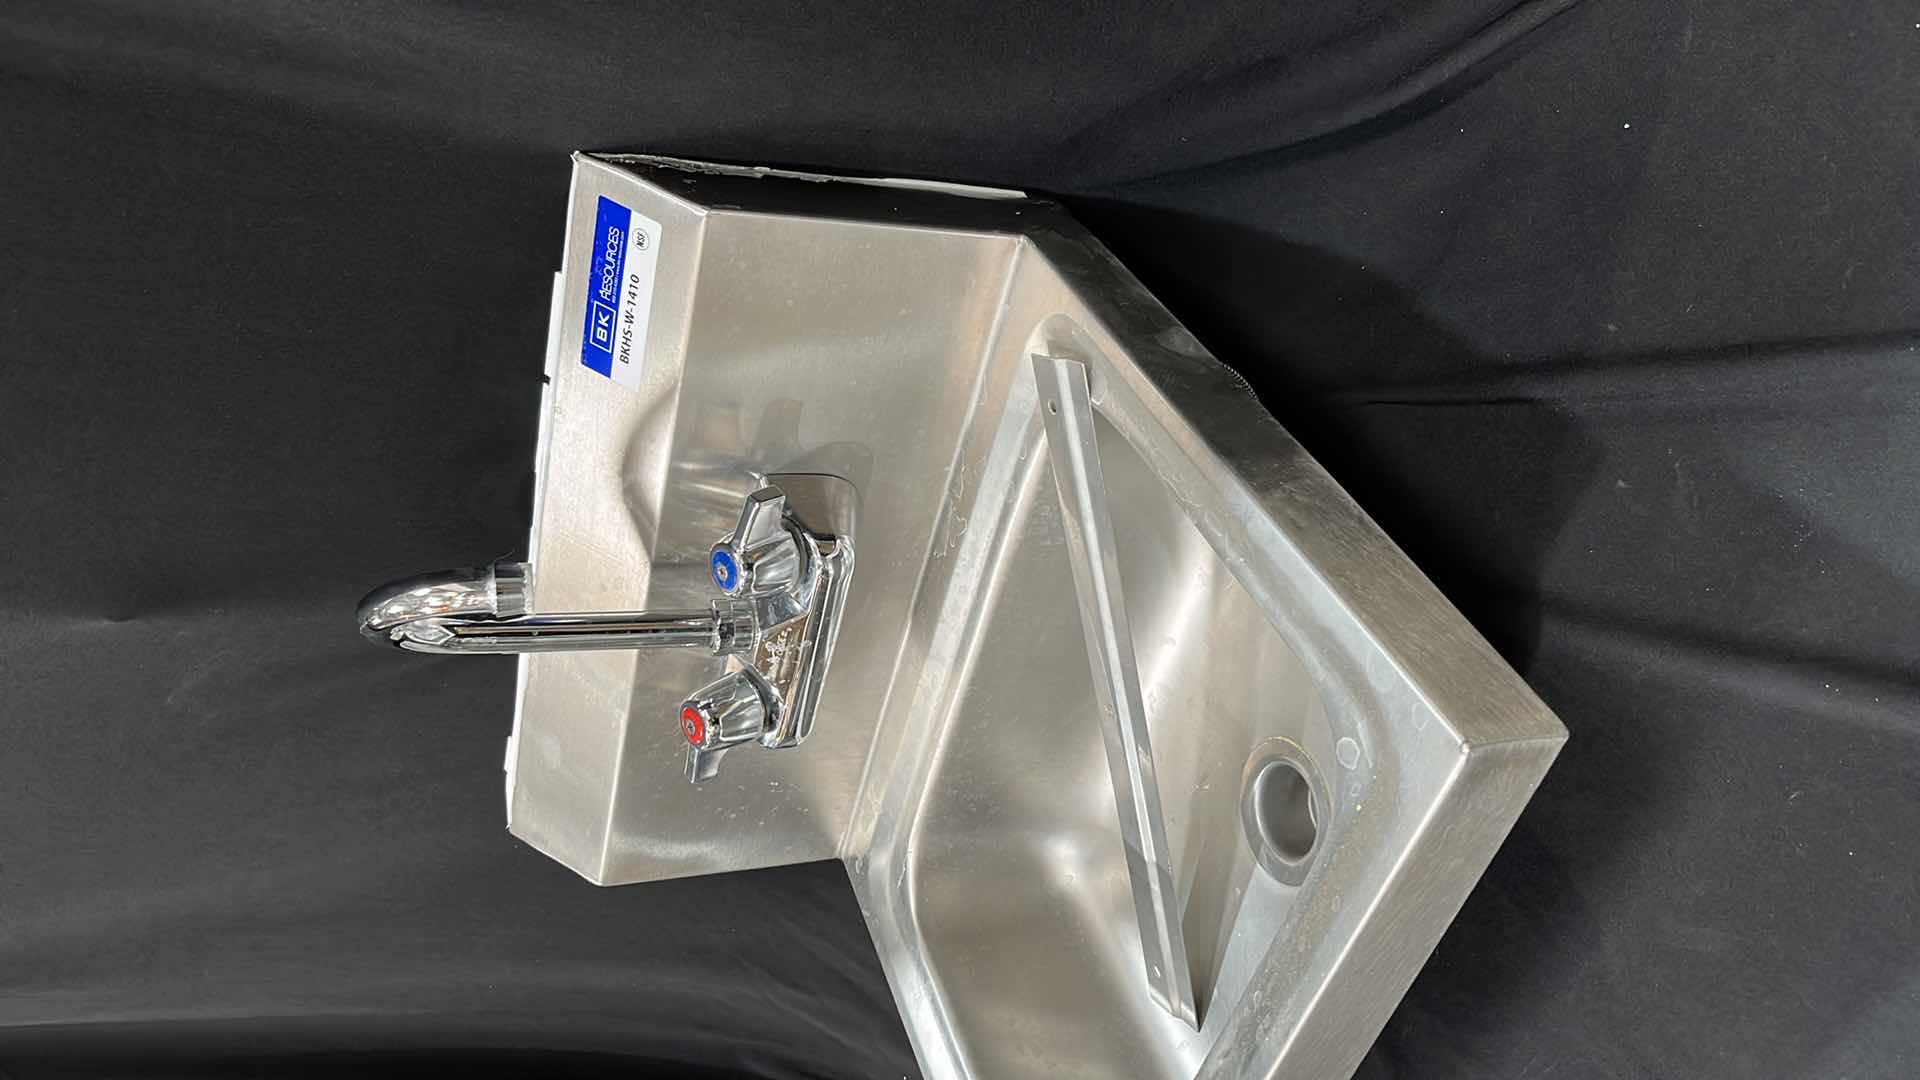 Photo 3 of BK RESOURCES STAINLESS STEEL HAND SINK 17.25” X 15.5” X 14”H (MODEL #BKHS-W-1410)